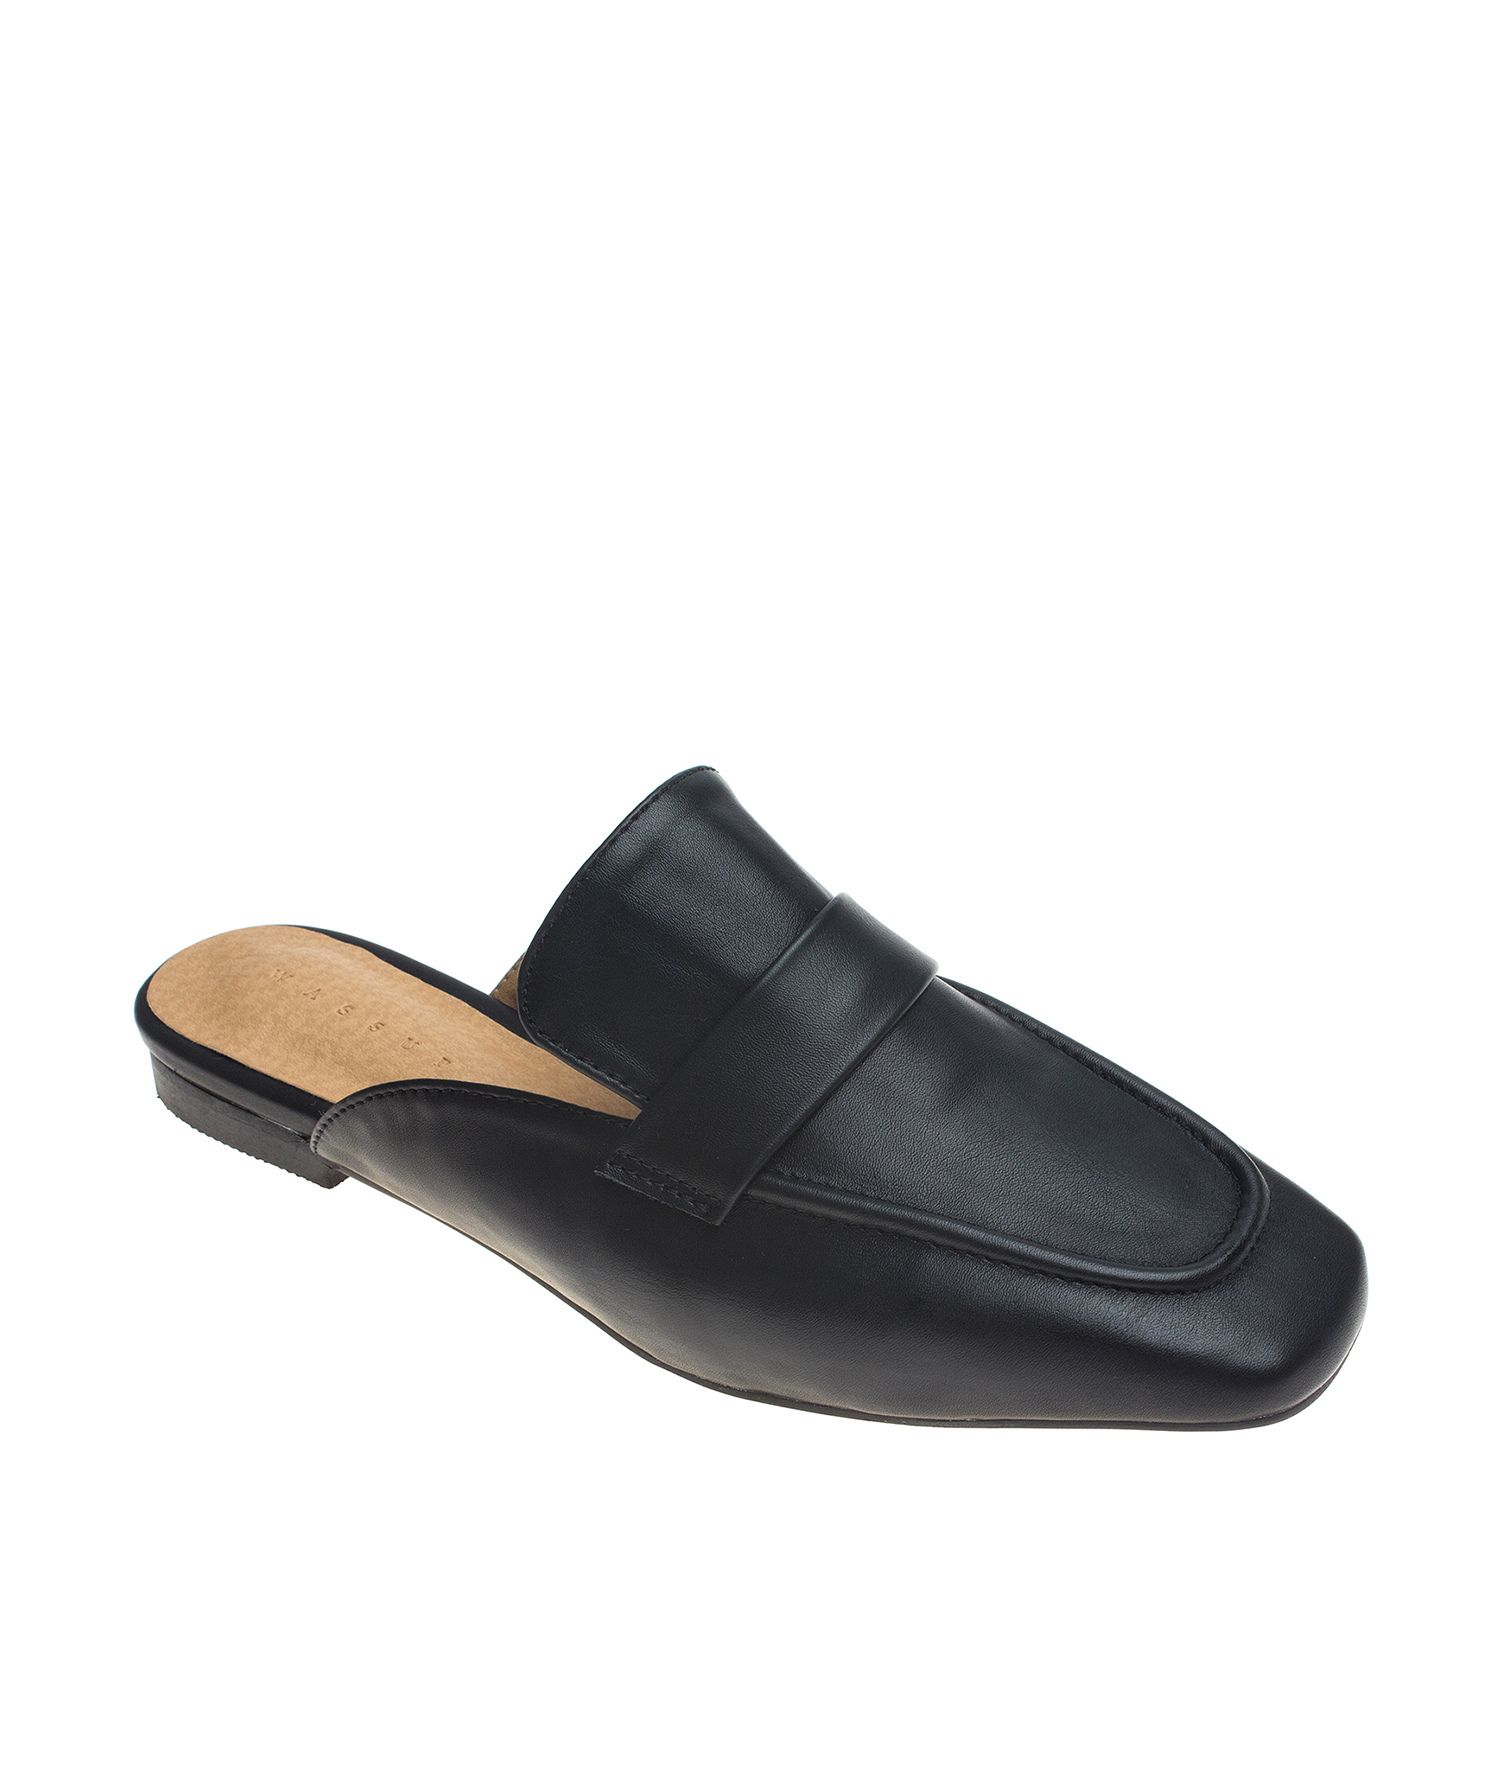 Vegan Leather Penny Loafer Slippers 